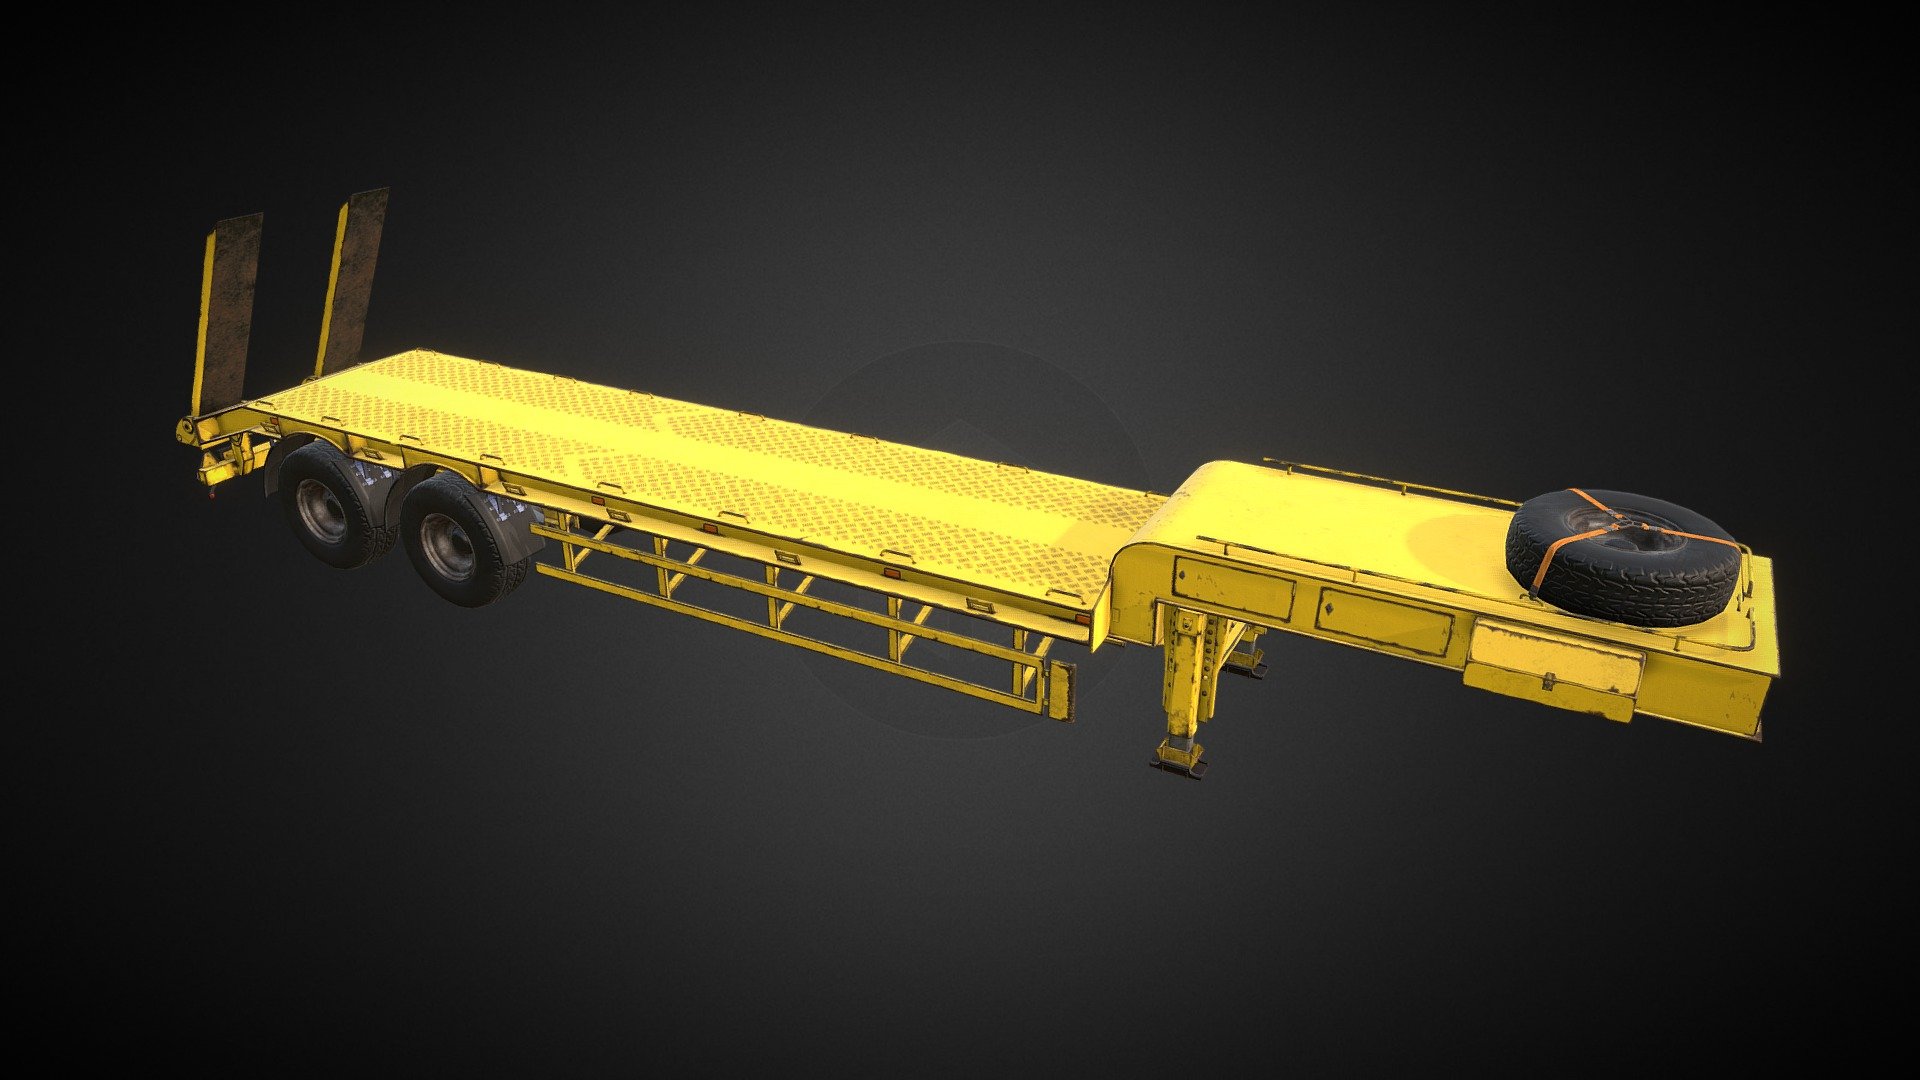 3d model of low-bed truck trailer. Used Substance Painter 3d model